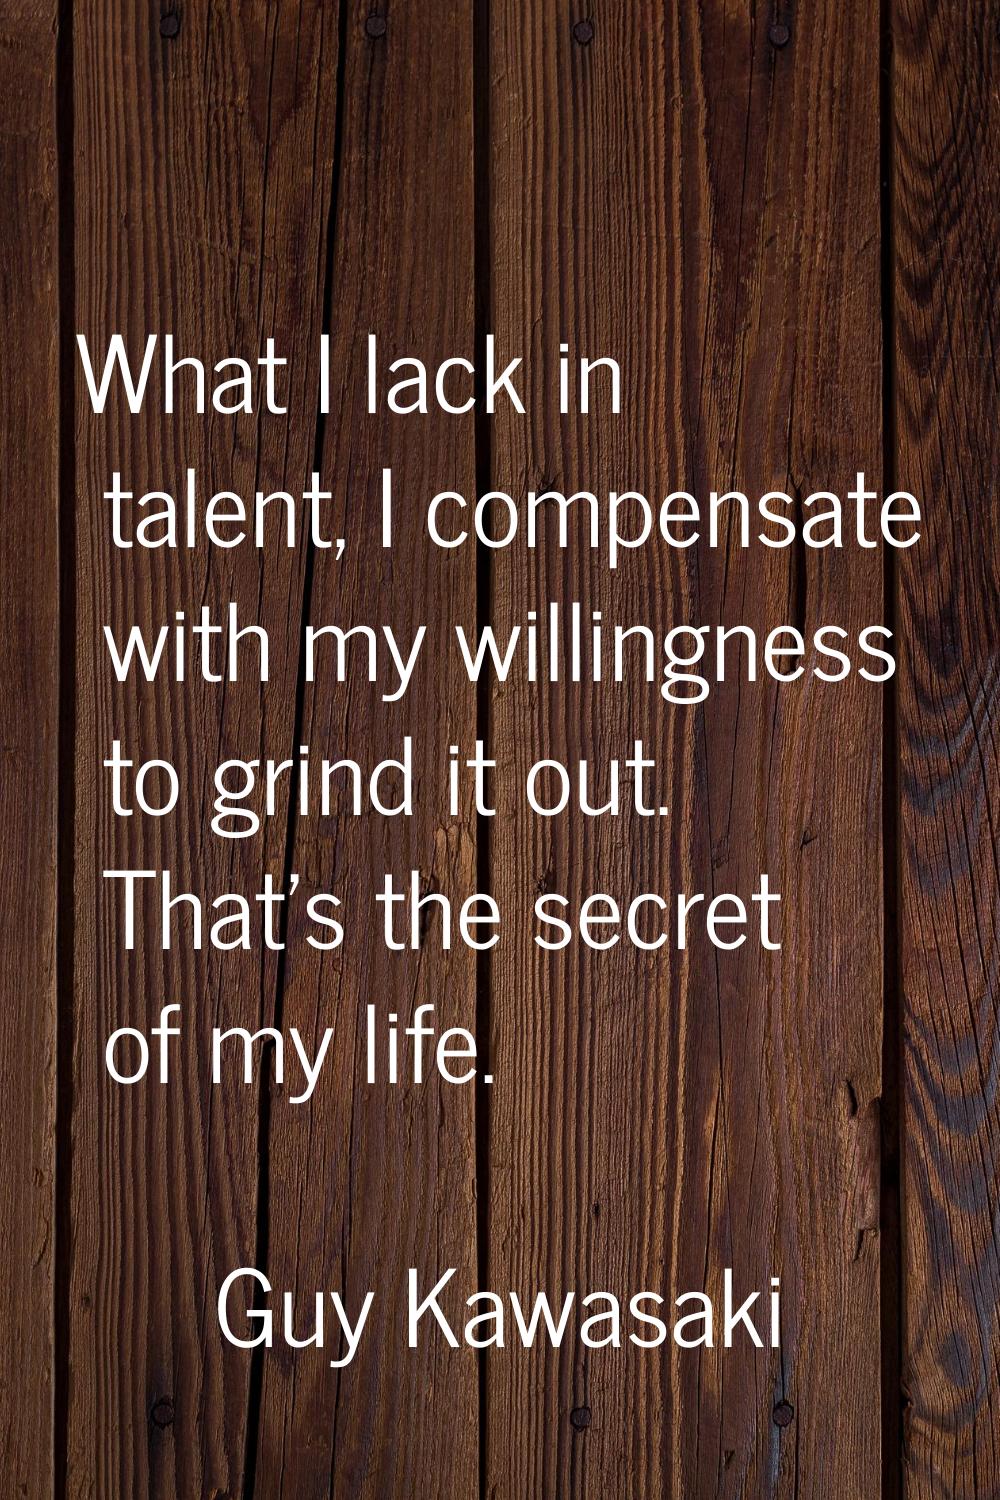 What I lack in talent, I compensate with my willingness to grind it out. That's the secret of my li